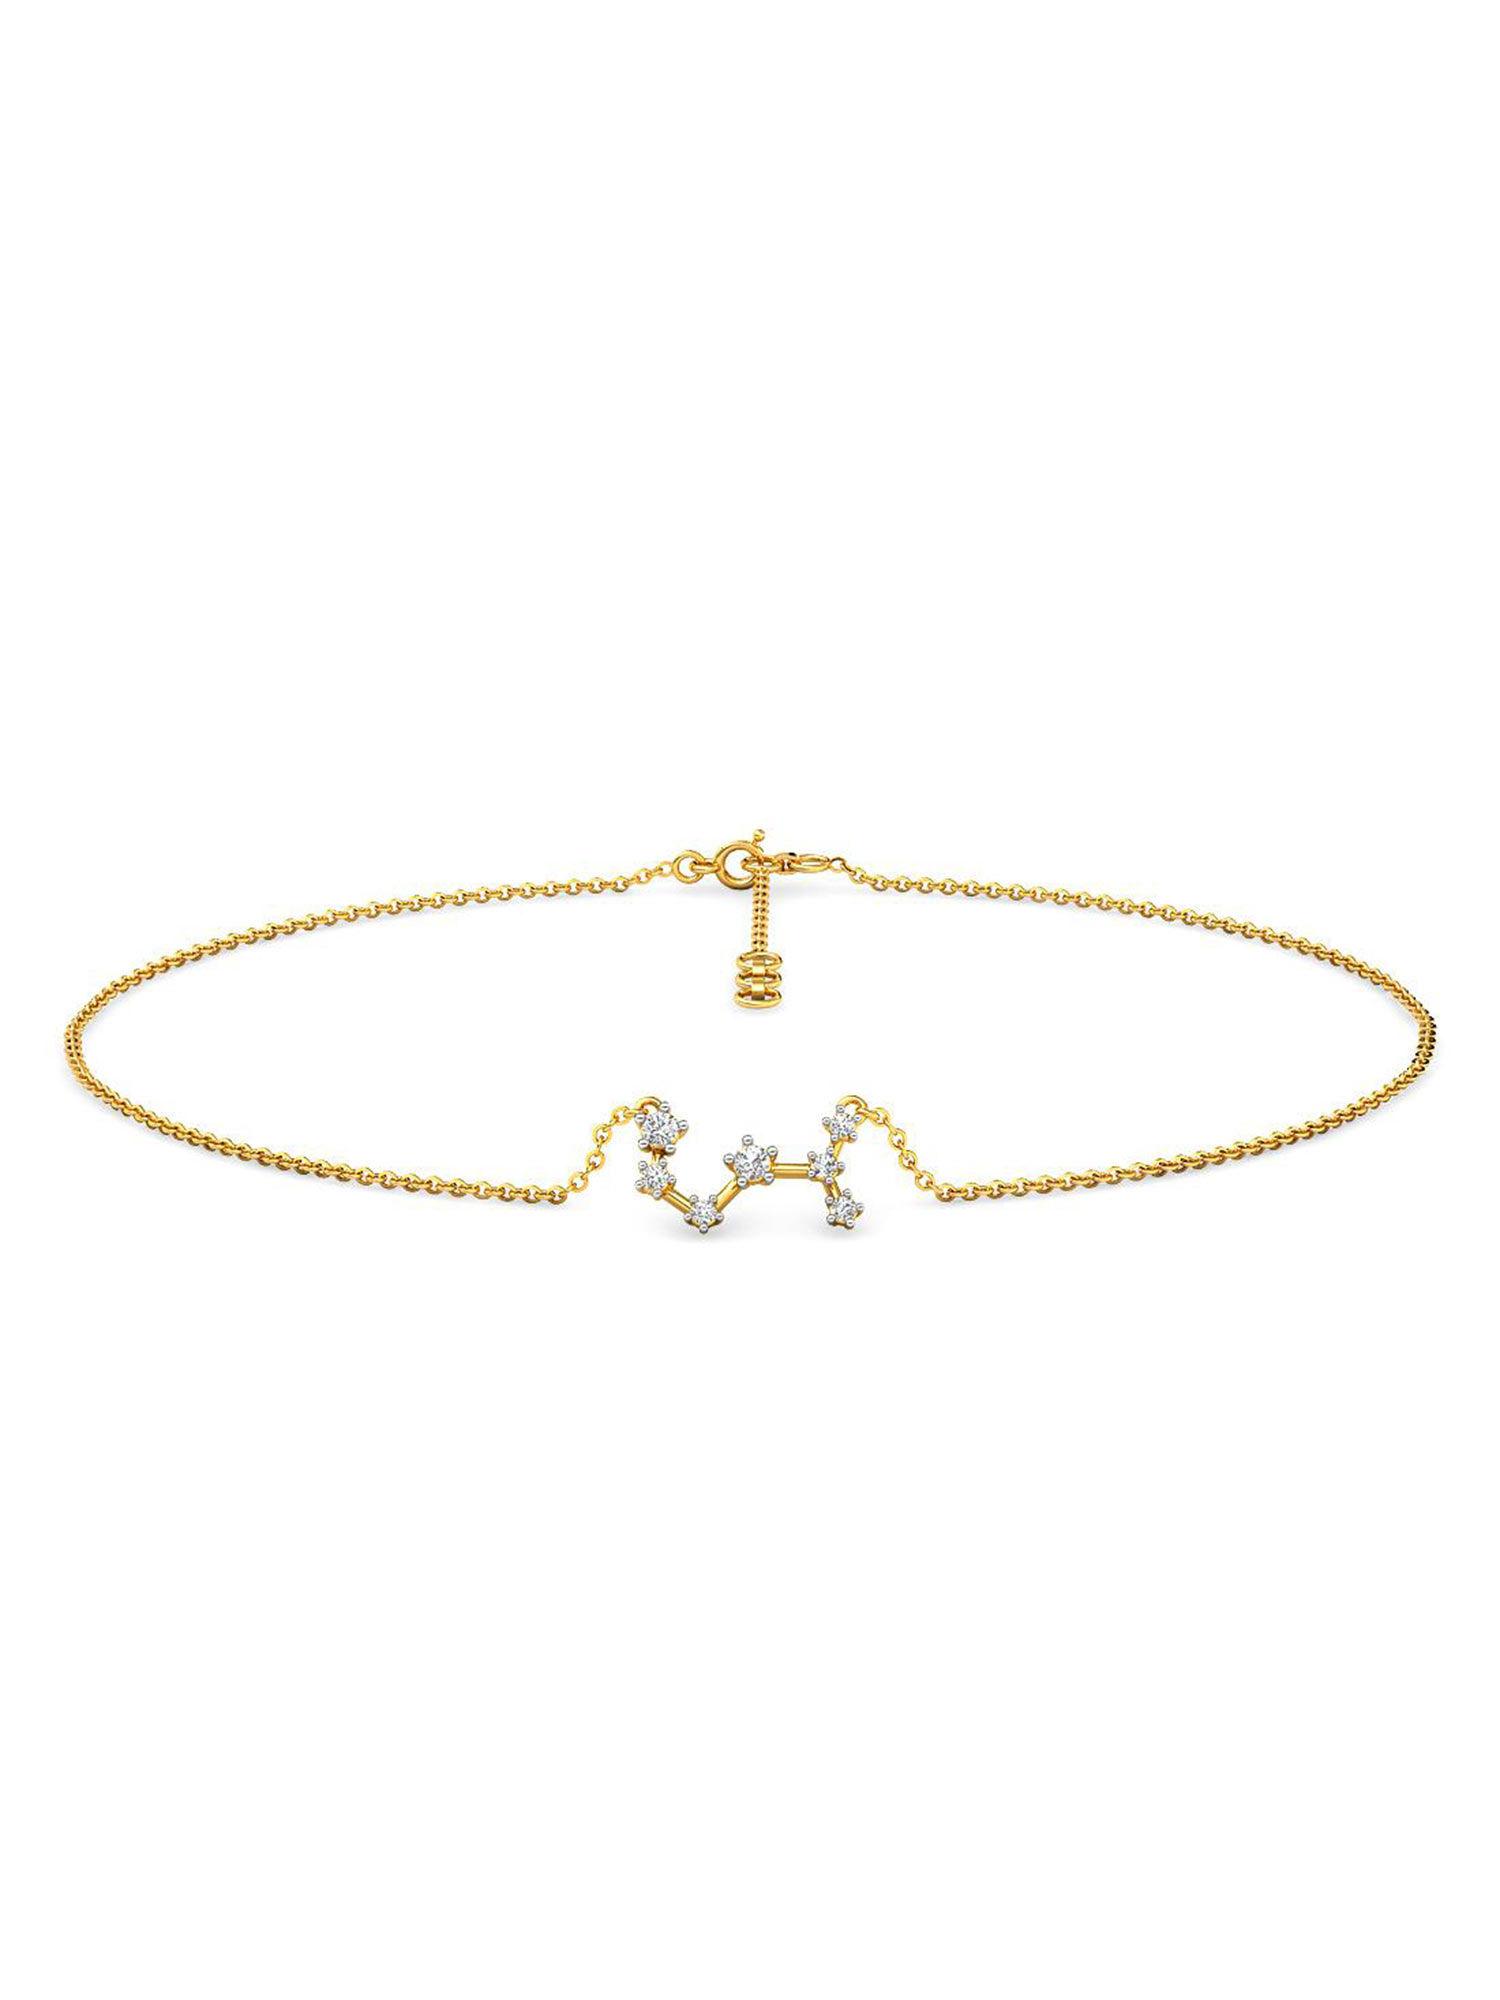 scorpio 14k yellow gold and diamond anklet for women